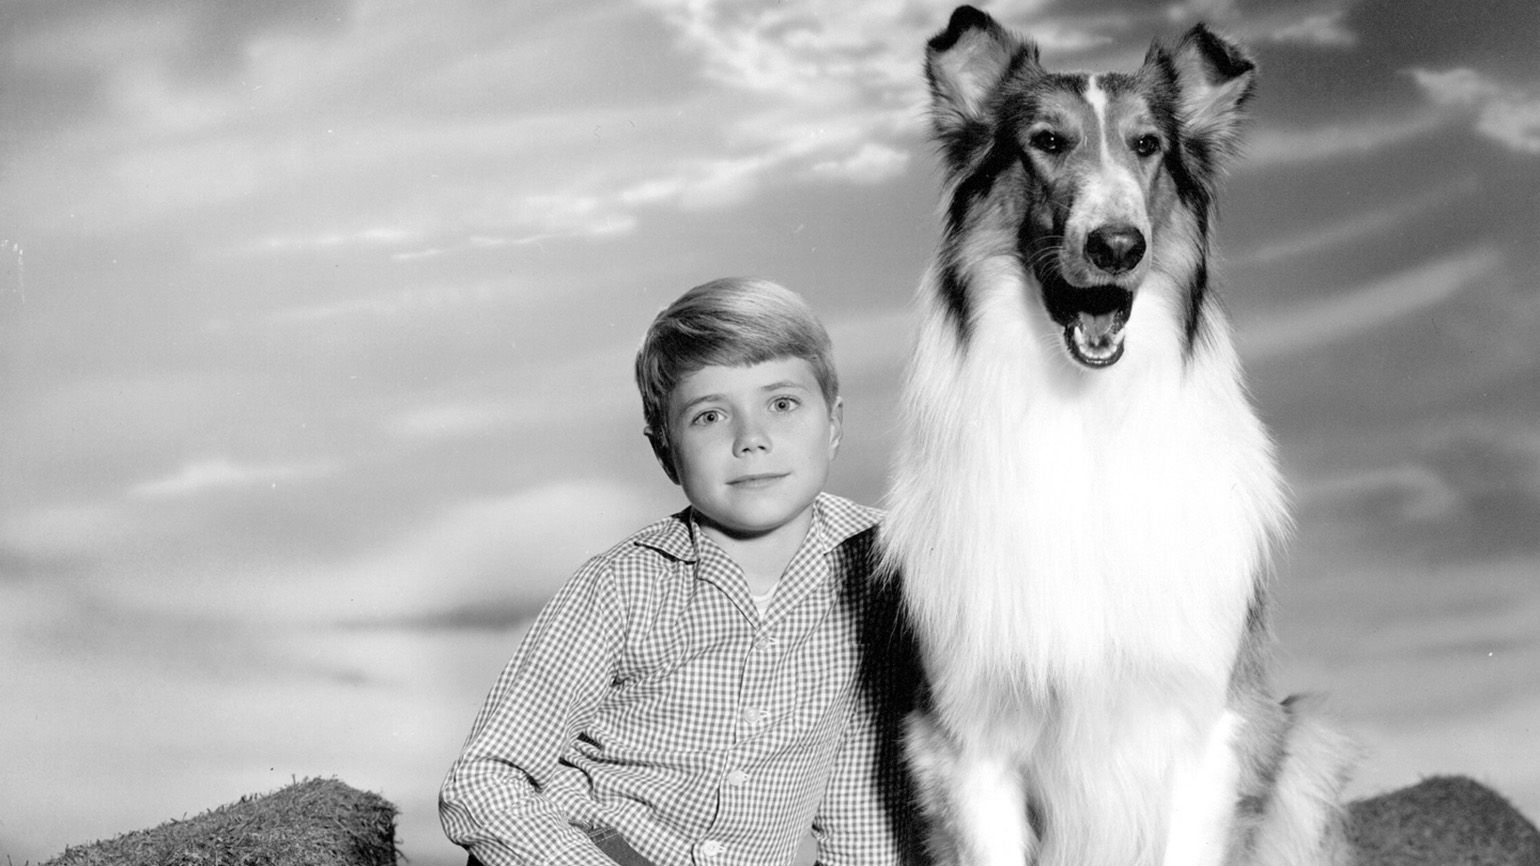 Lassie. The famous dog, Lassie, who appeared in many